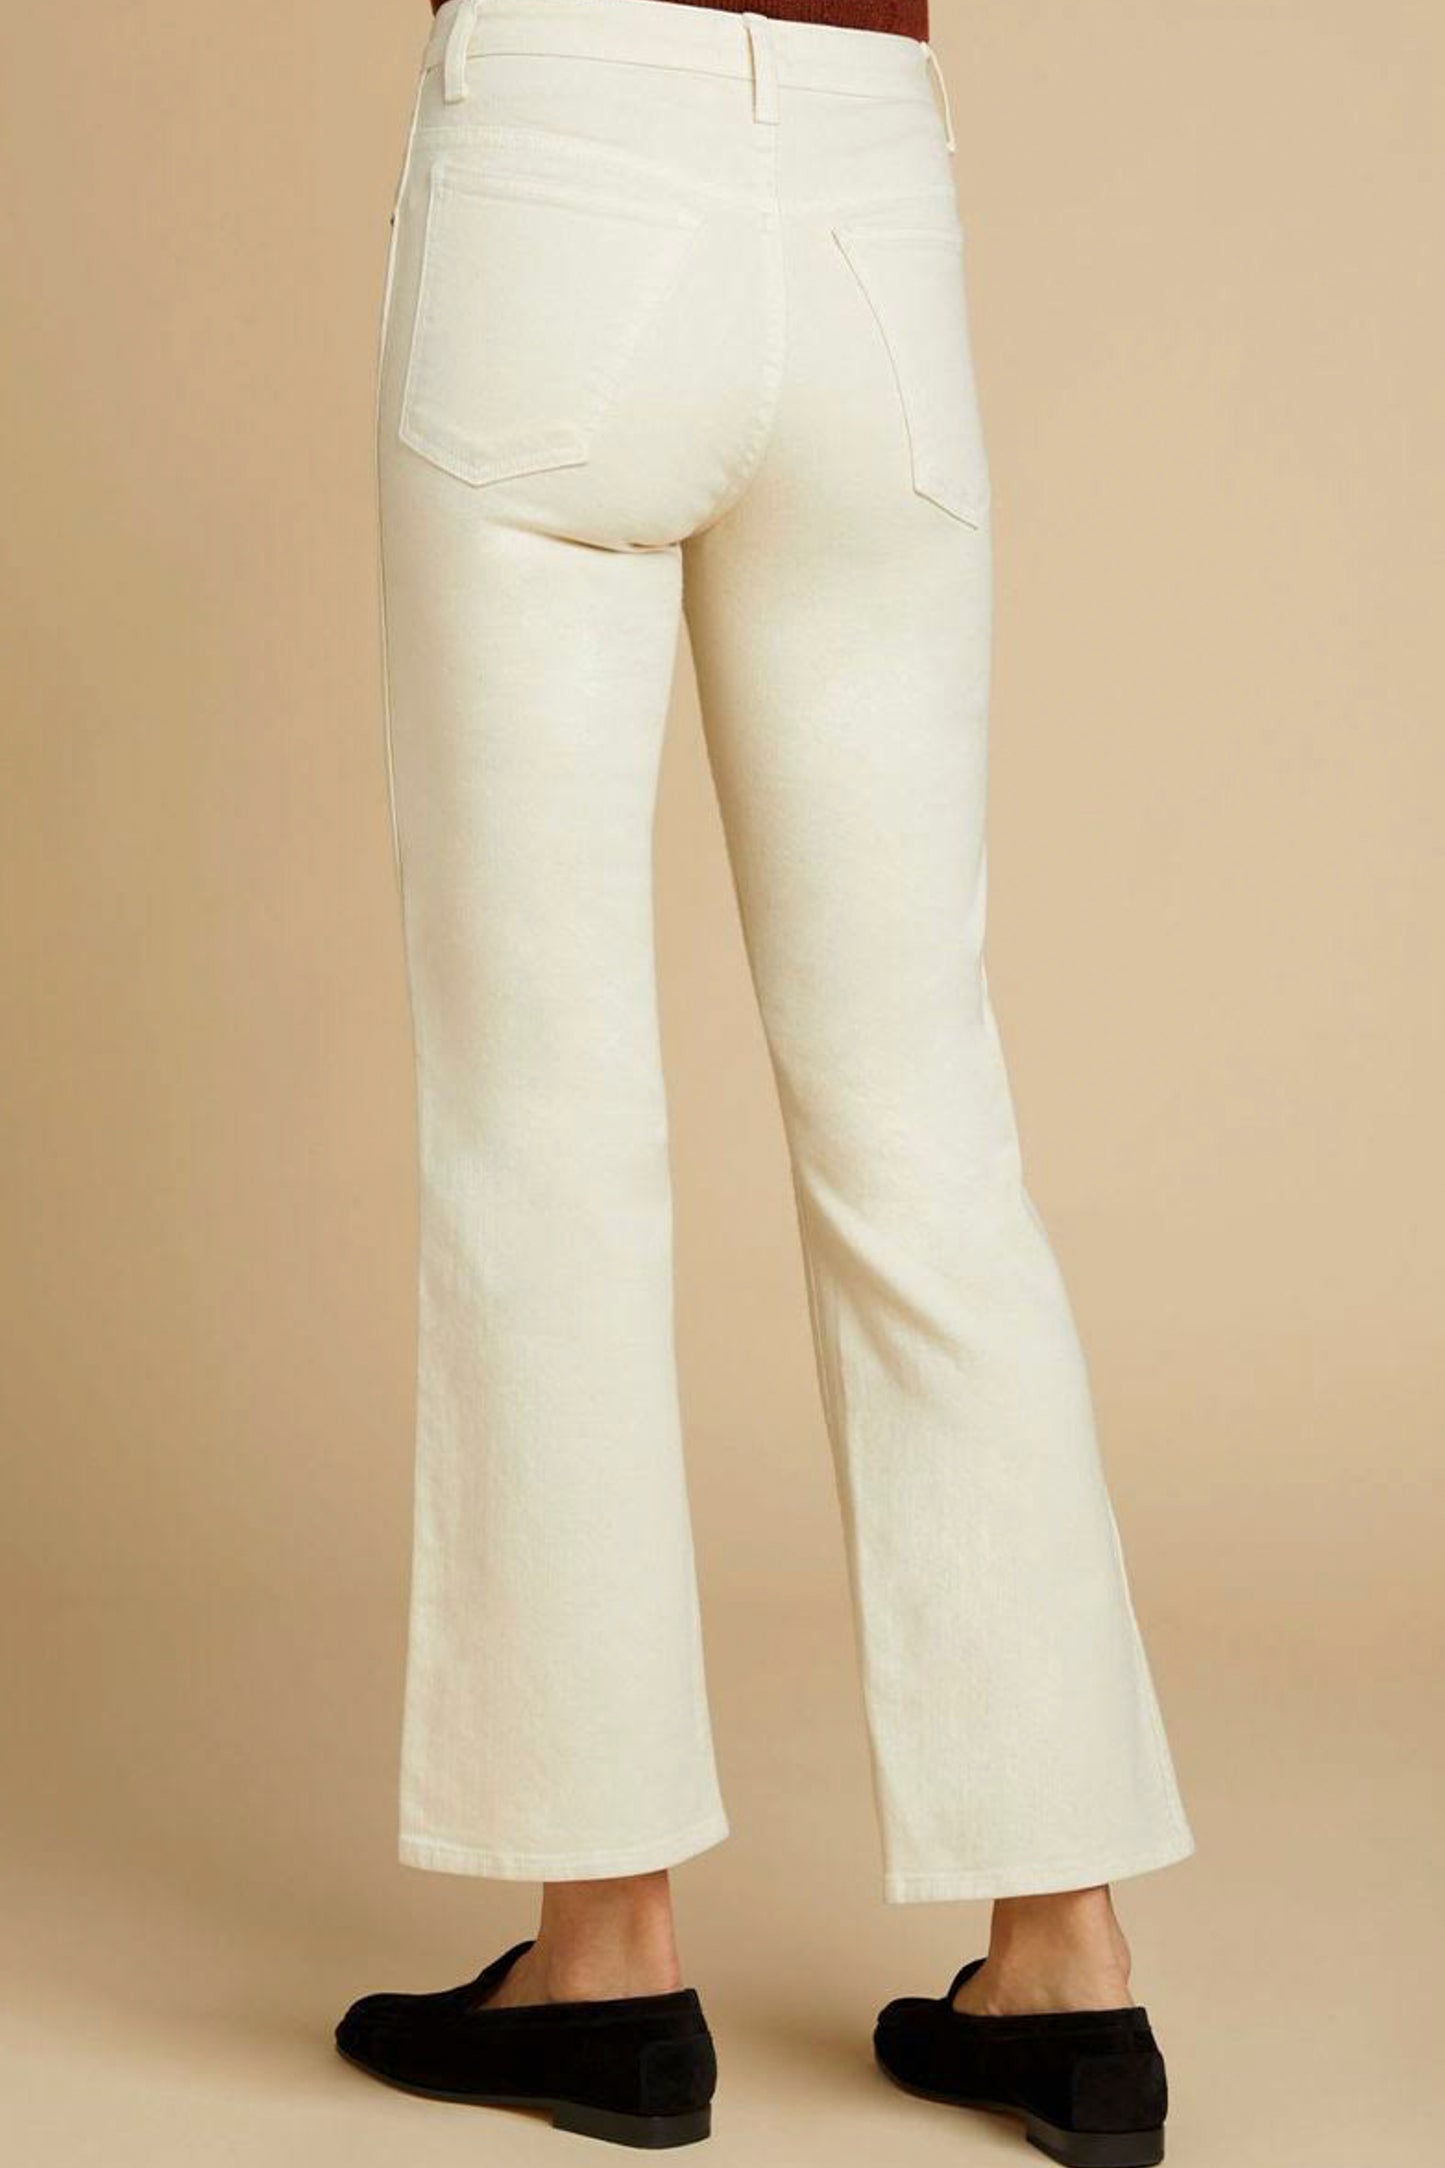 VIVIAN NEW BOOTCUT FLARE JEANS